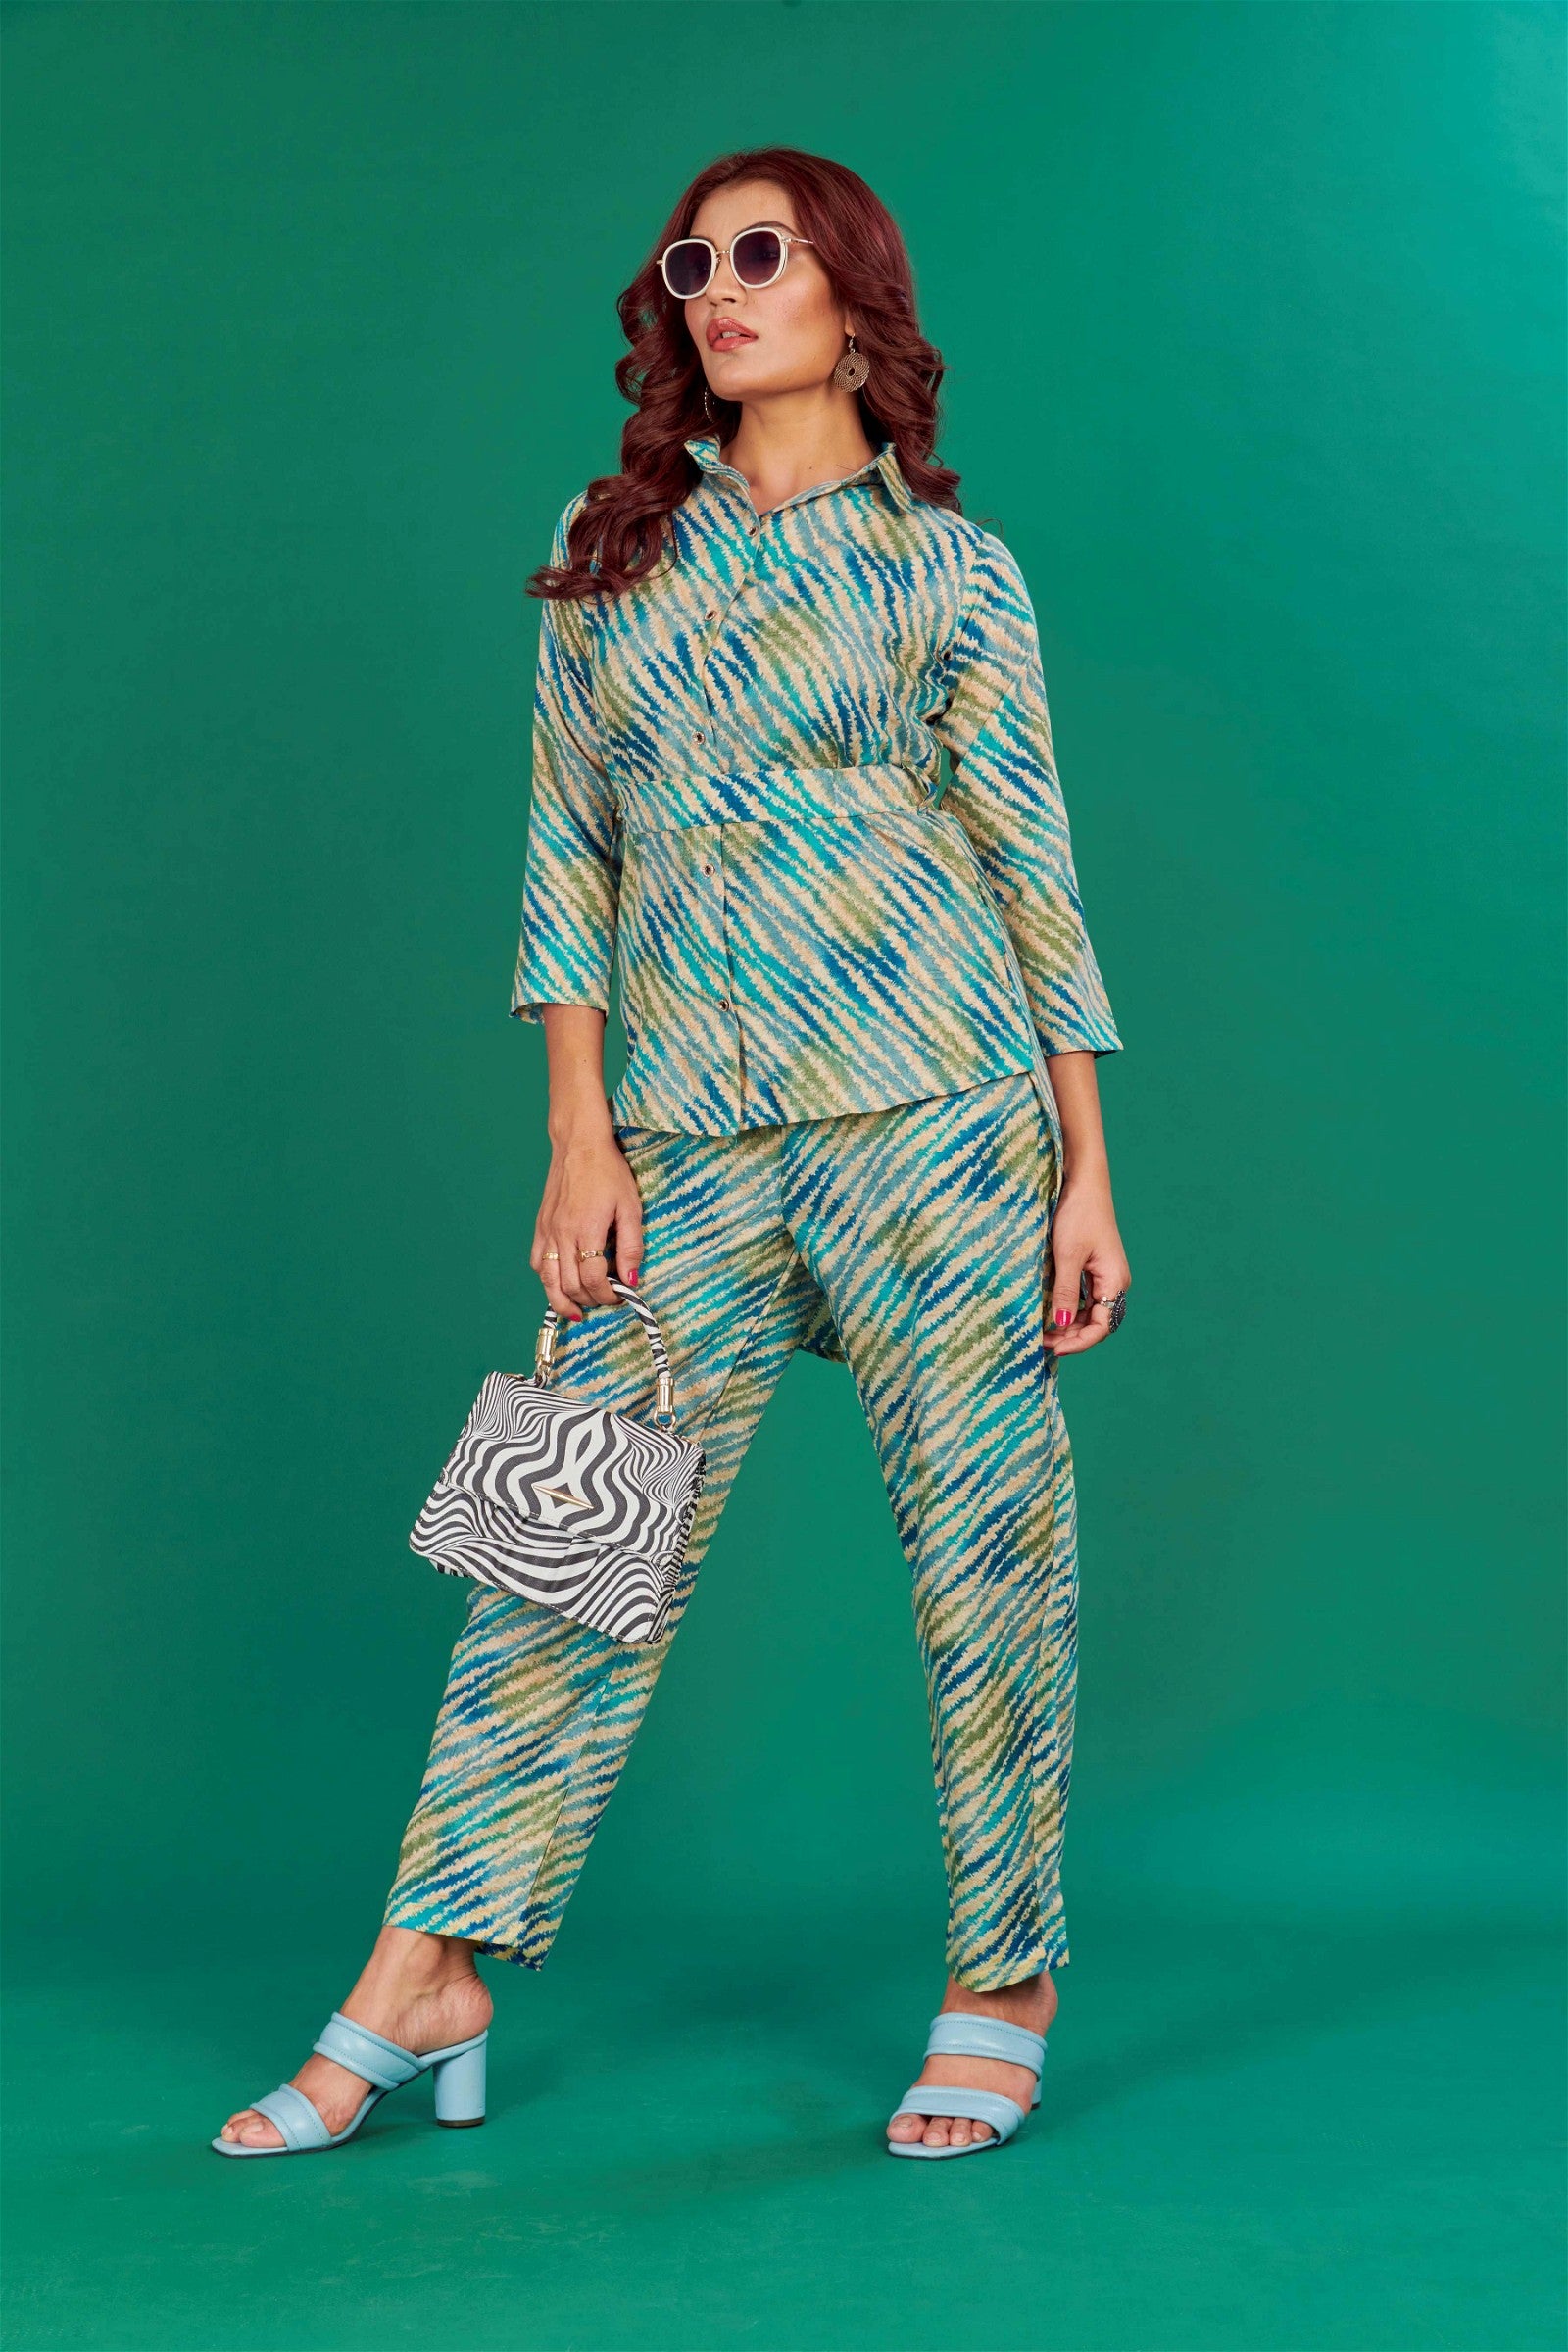 The model in the image is wearing Teal Cotton Party Wear Co-ords Set from Alice Milan. Crafted with the finest materials and impeccable attention to detail, the  looks premium, trendy, luxurious and offers unparalleled comfort. It’s a perfect clothing option for loungewear, resort wear, party wear or for an airport look. The woman in the image looks happy, and confident with her style statement putting a happy smile on her face.